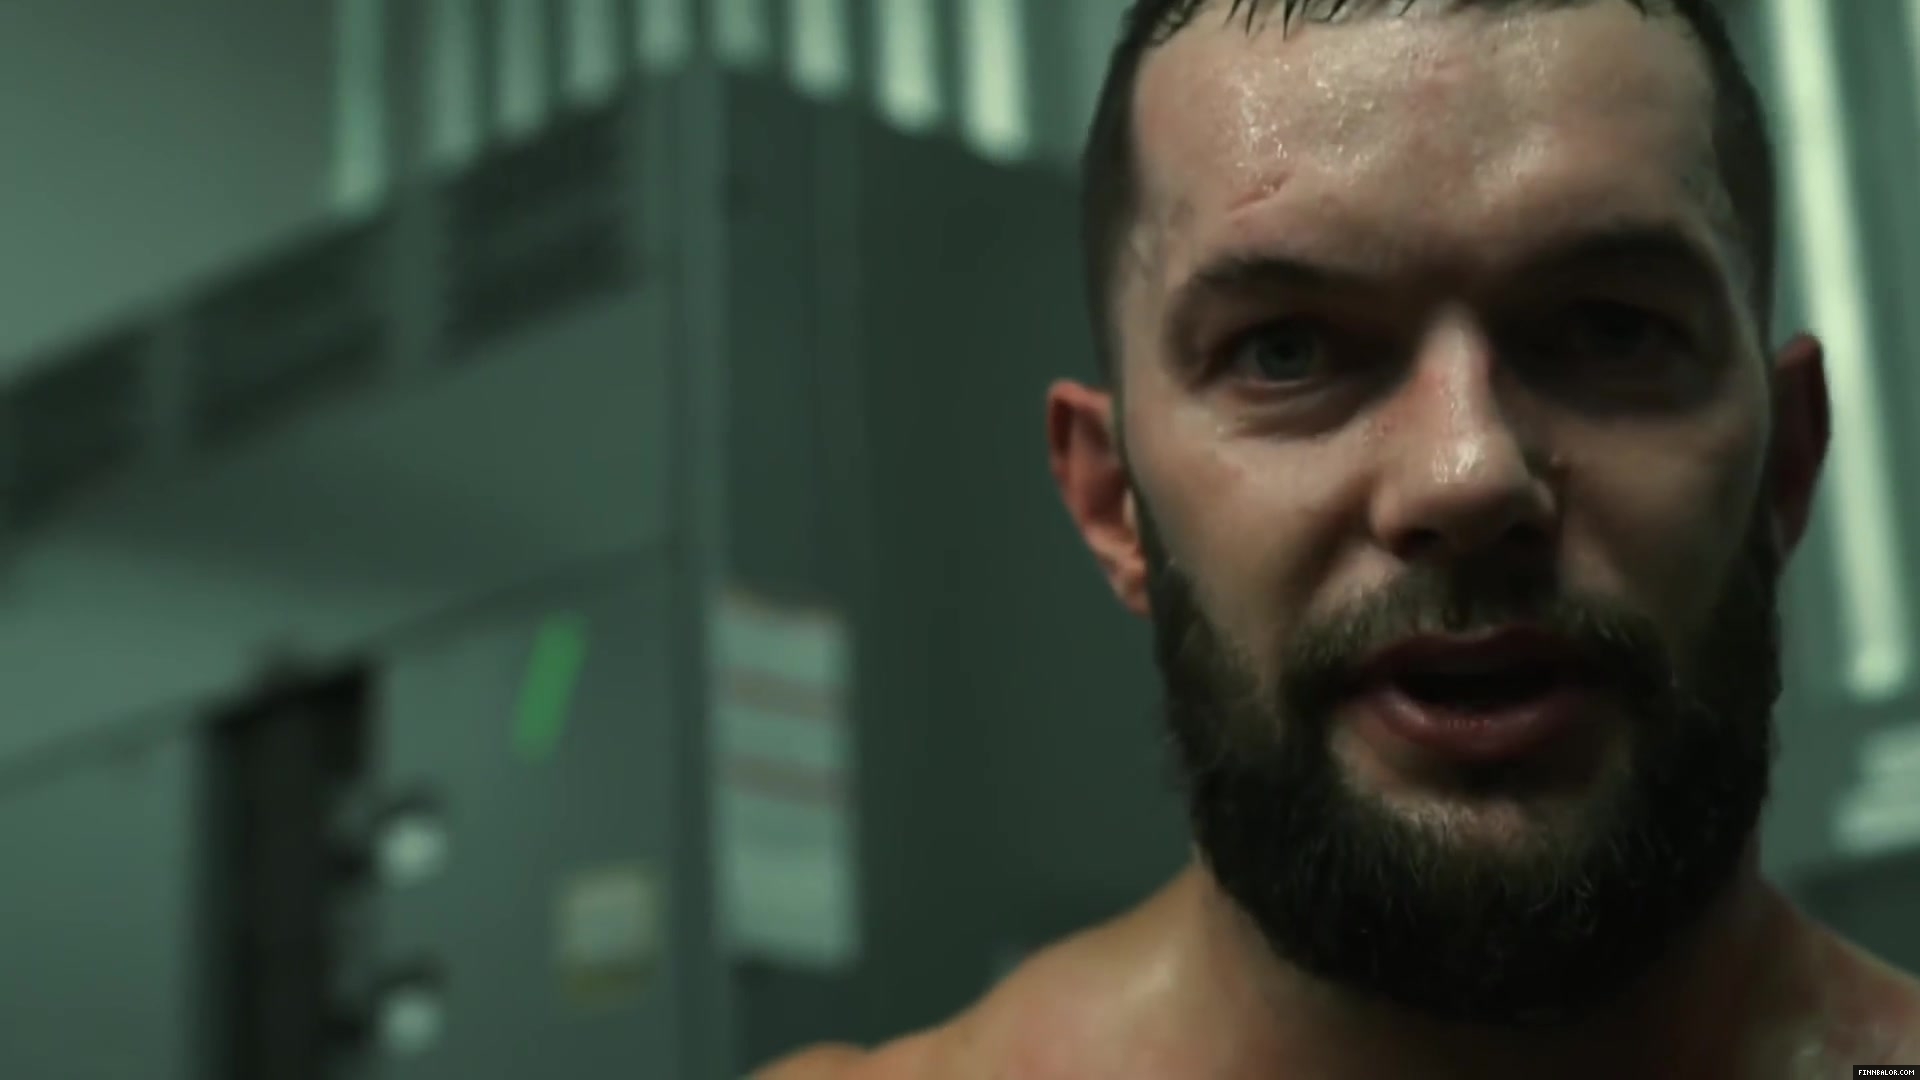 Finn_Balor___The_Rising_of_the_Prince_in_NXT_607.jpg